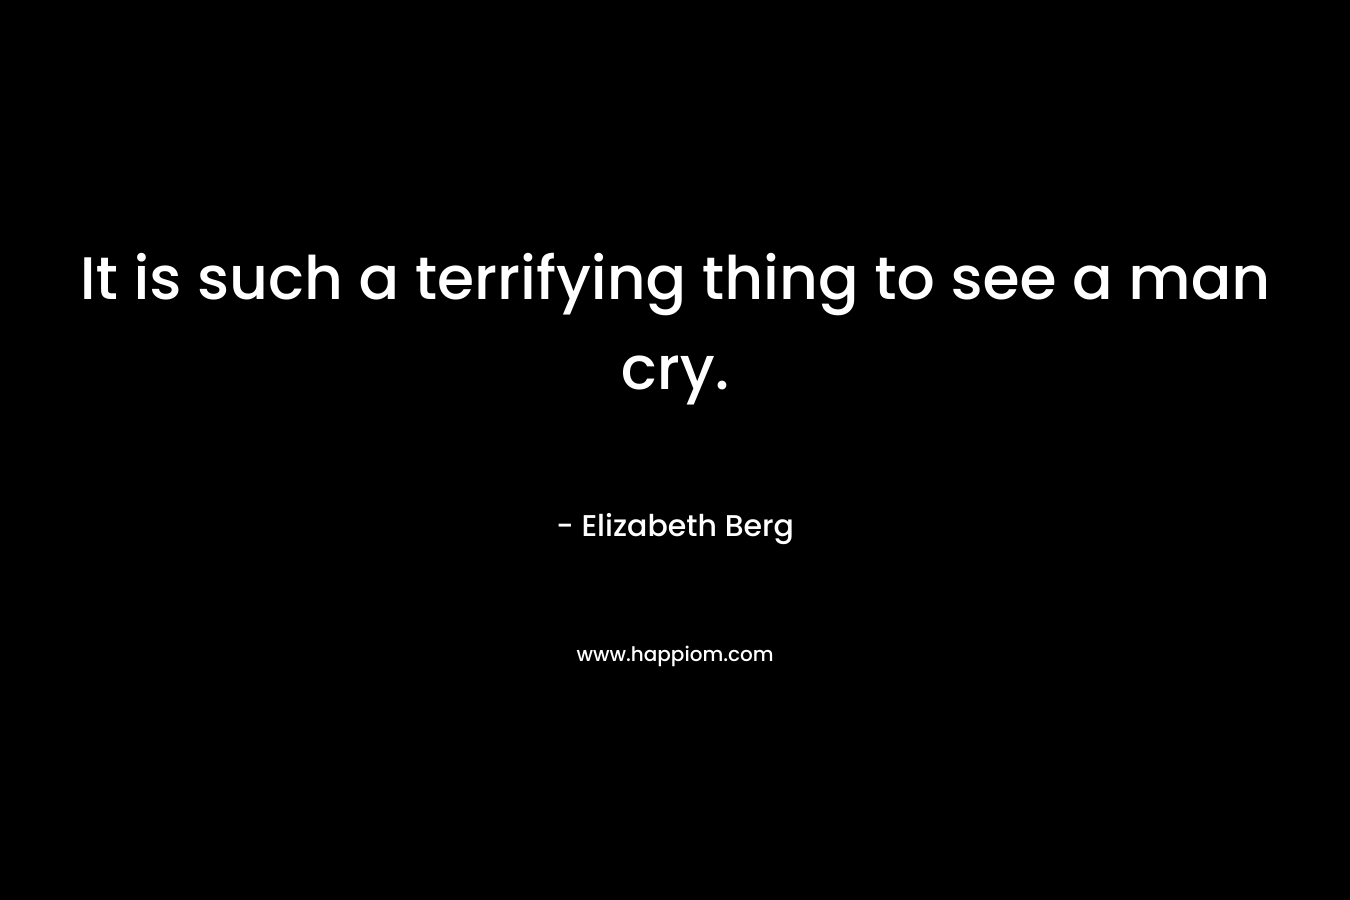 It is such a terrifying thing to see a man cry. – Elizabeth Berg